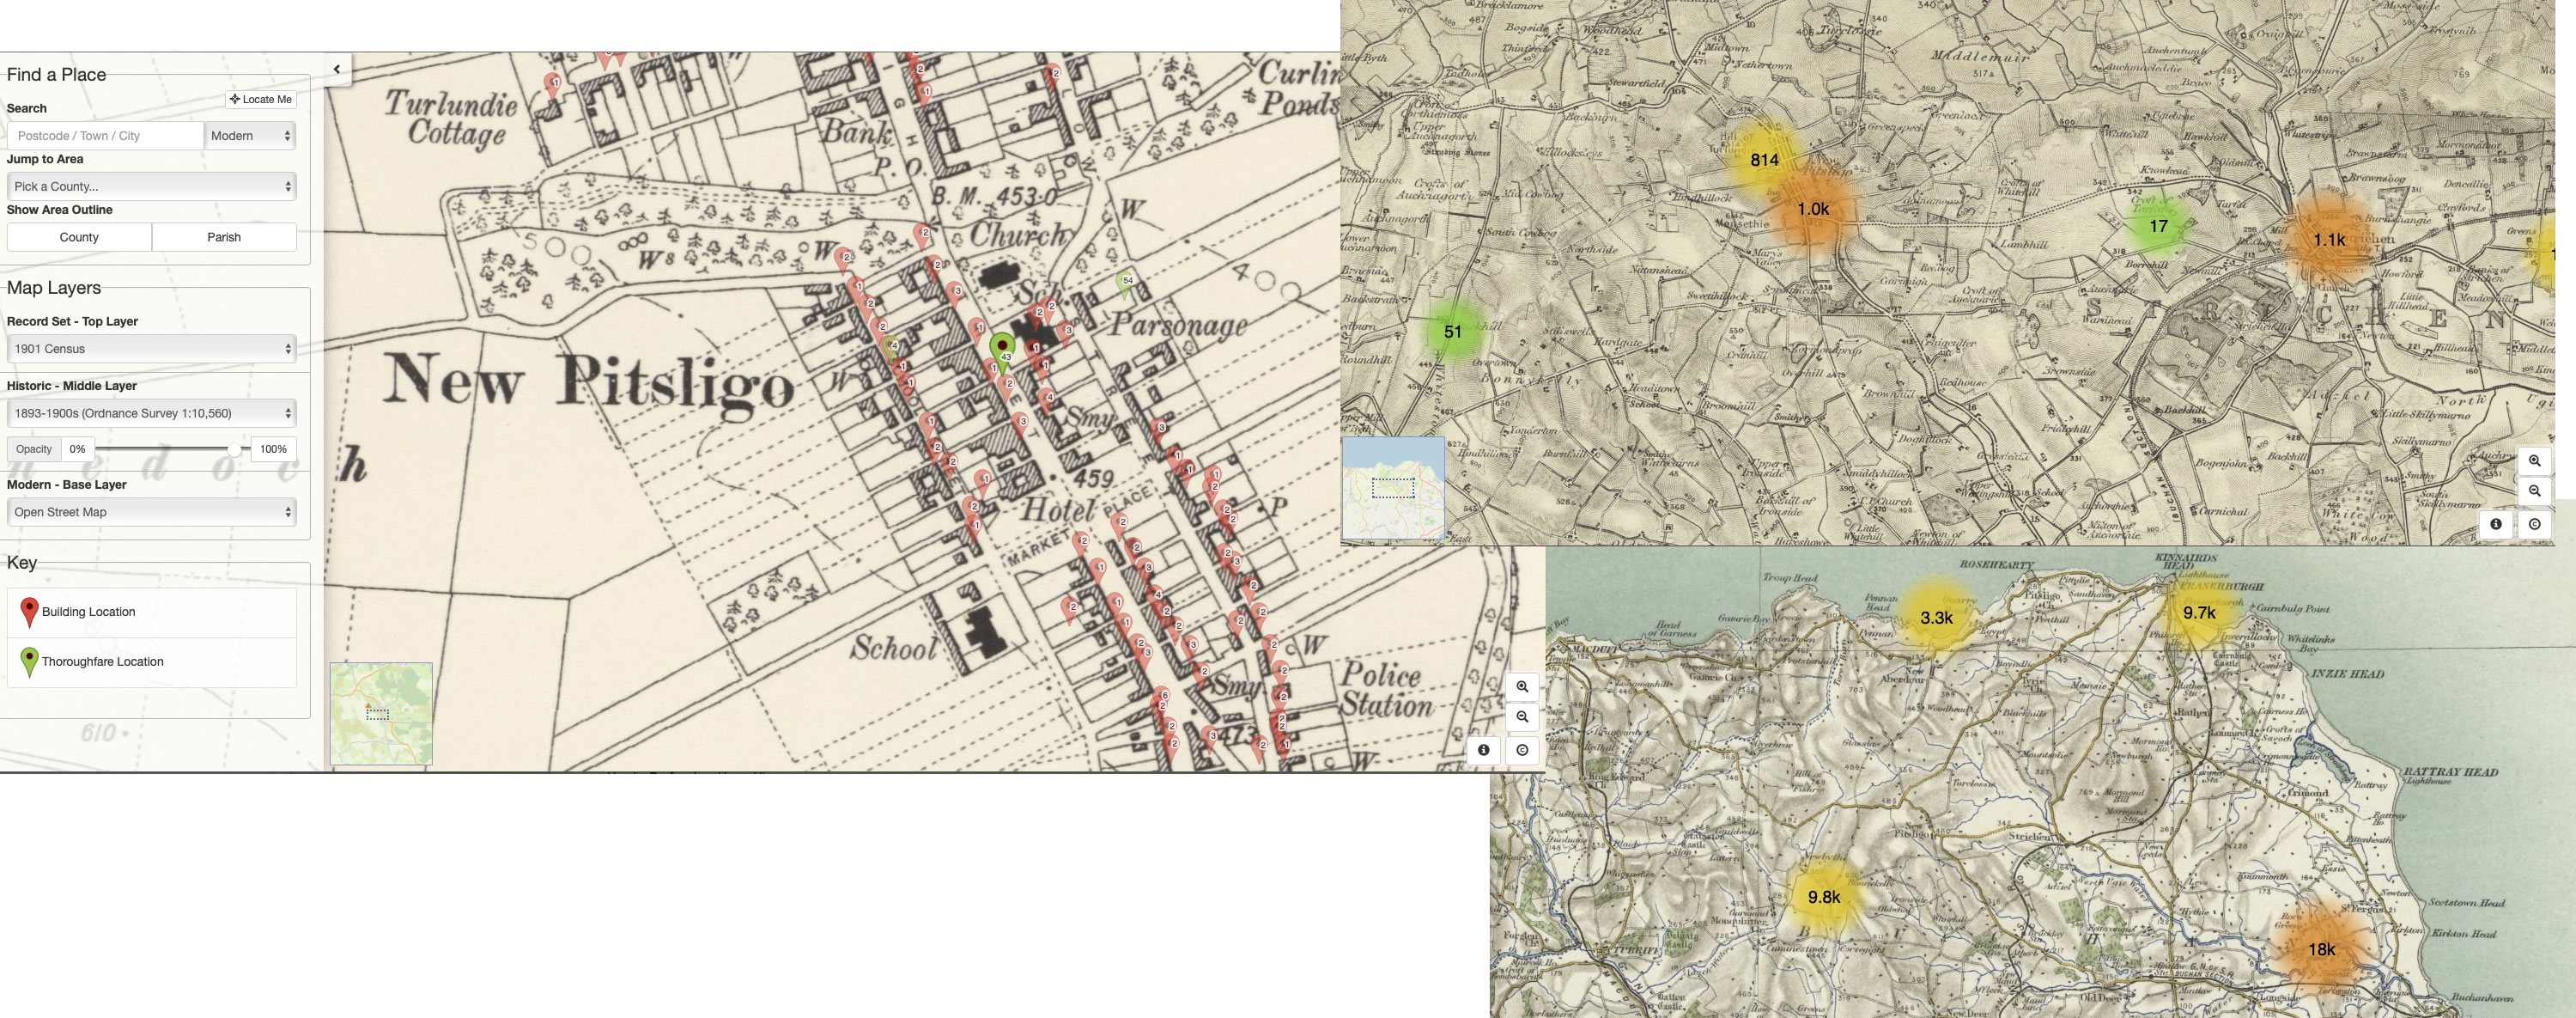 We can see New Pitsligo in Map Explorer, then zoom out to see the region of Tyrie and Aberdeenshire as a whole
		in the late 19th and early 20th centuries. Markers show family history record sets at TheGenealogist linked to
		the maps